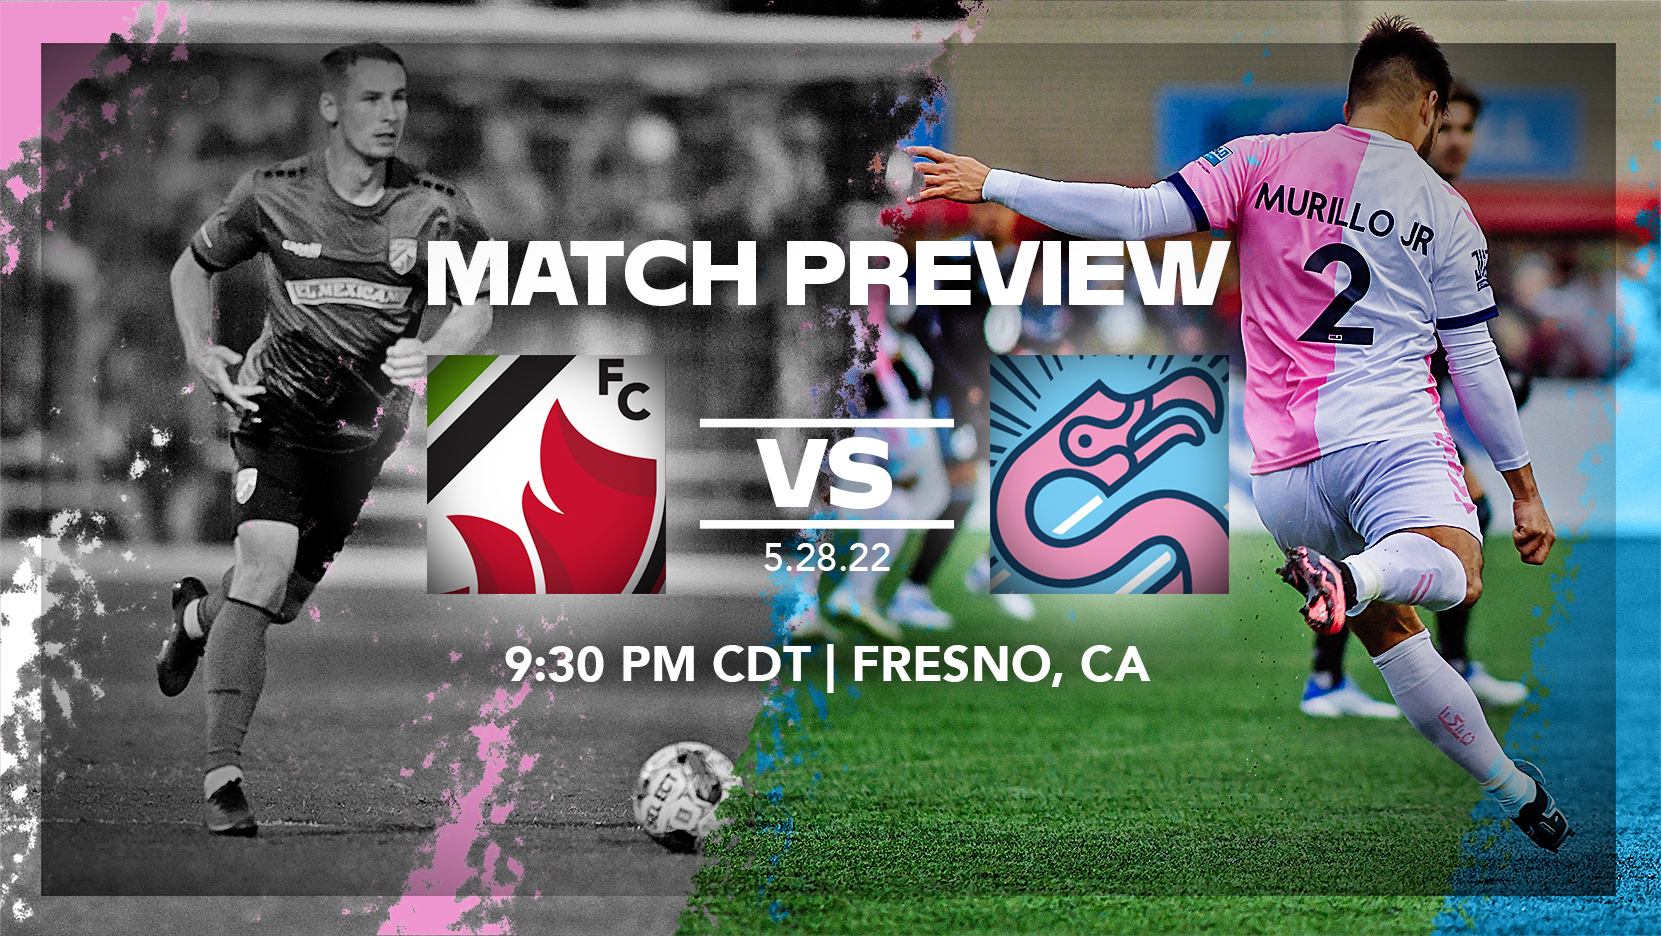 Match Preview Forward Madison Fc At Central Valley Fuego Fc Forward Madison Fc